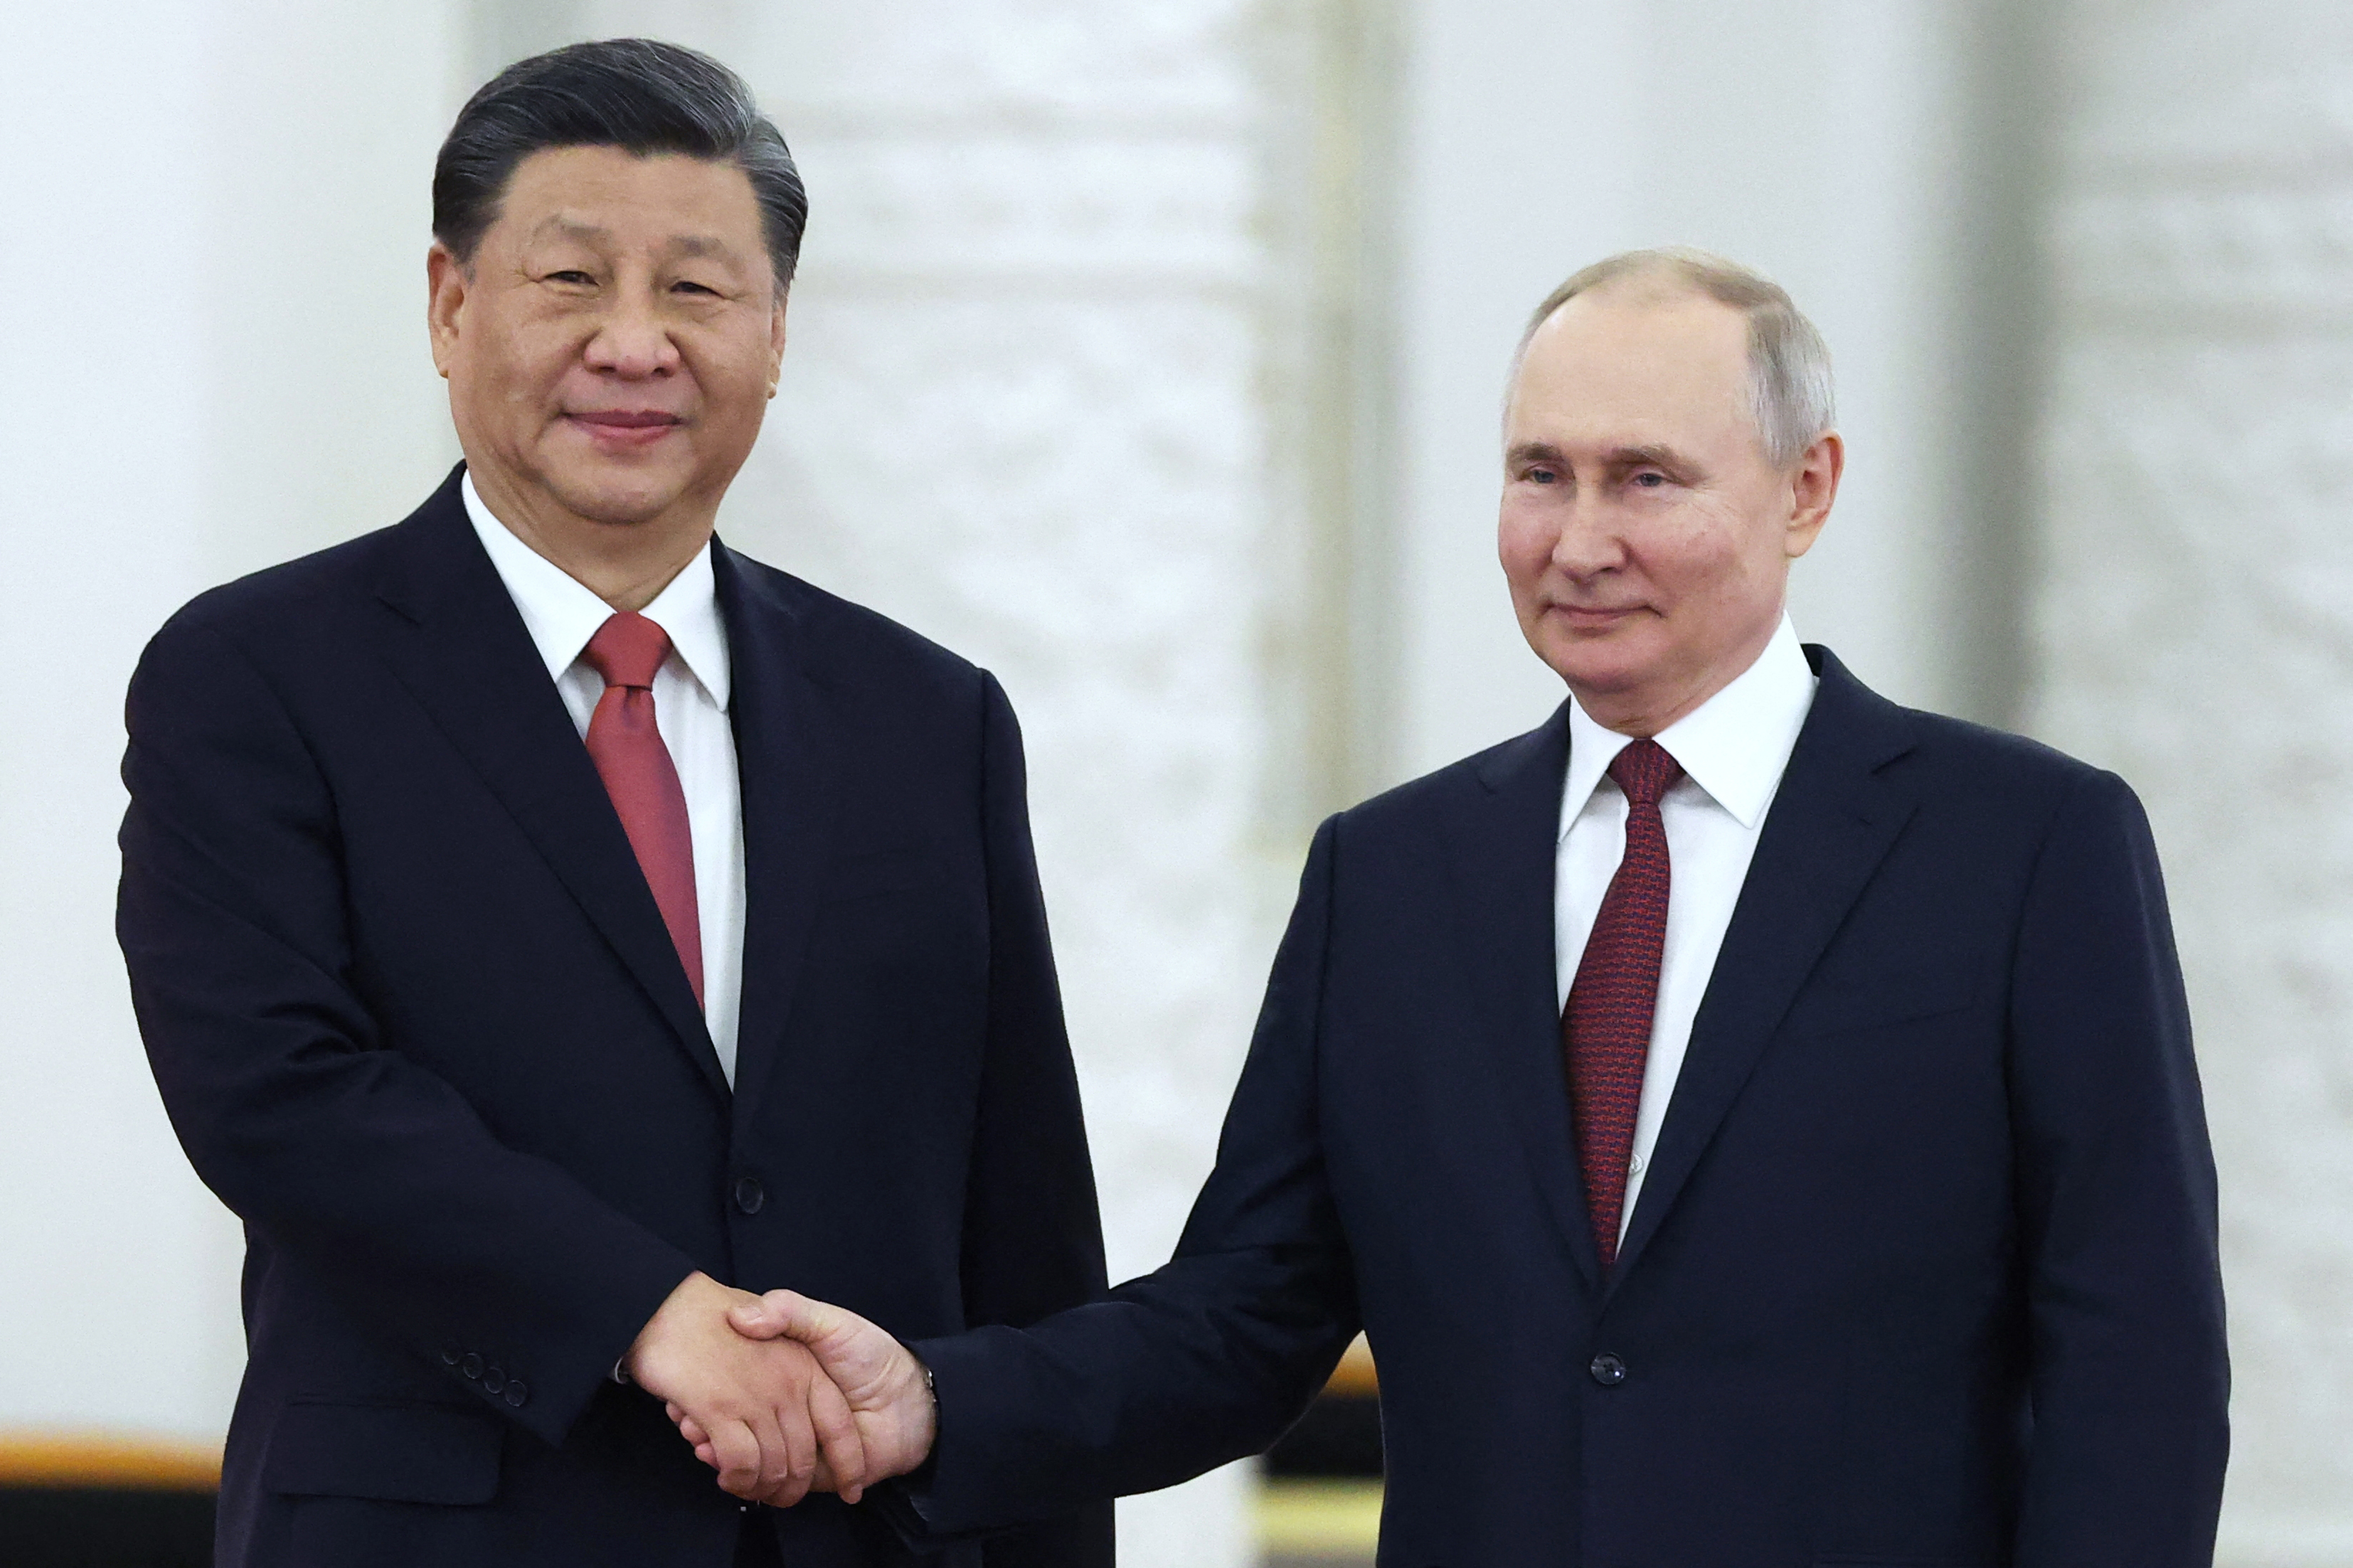 Taiwan Issued Dire Warning About Russia-China Dual Threat - Newsweek